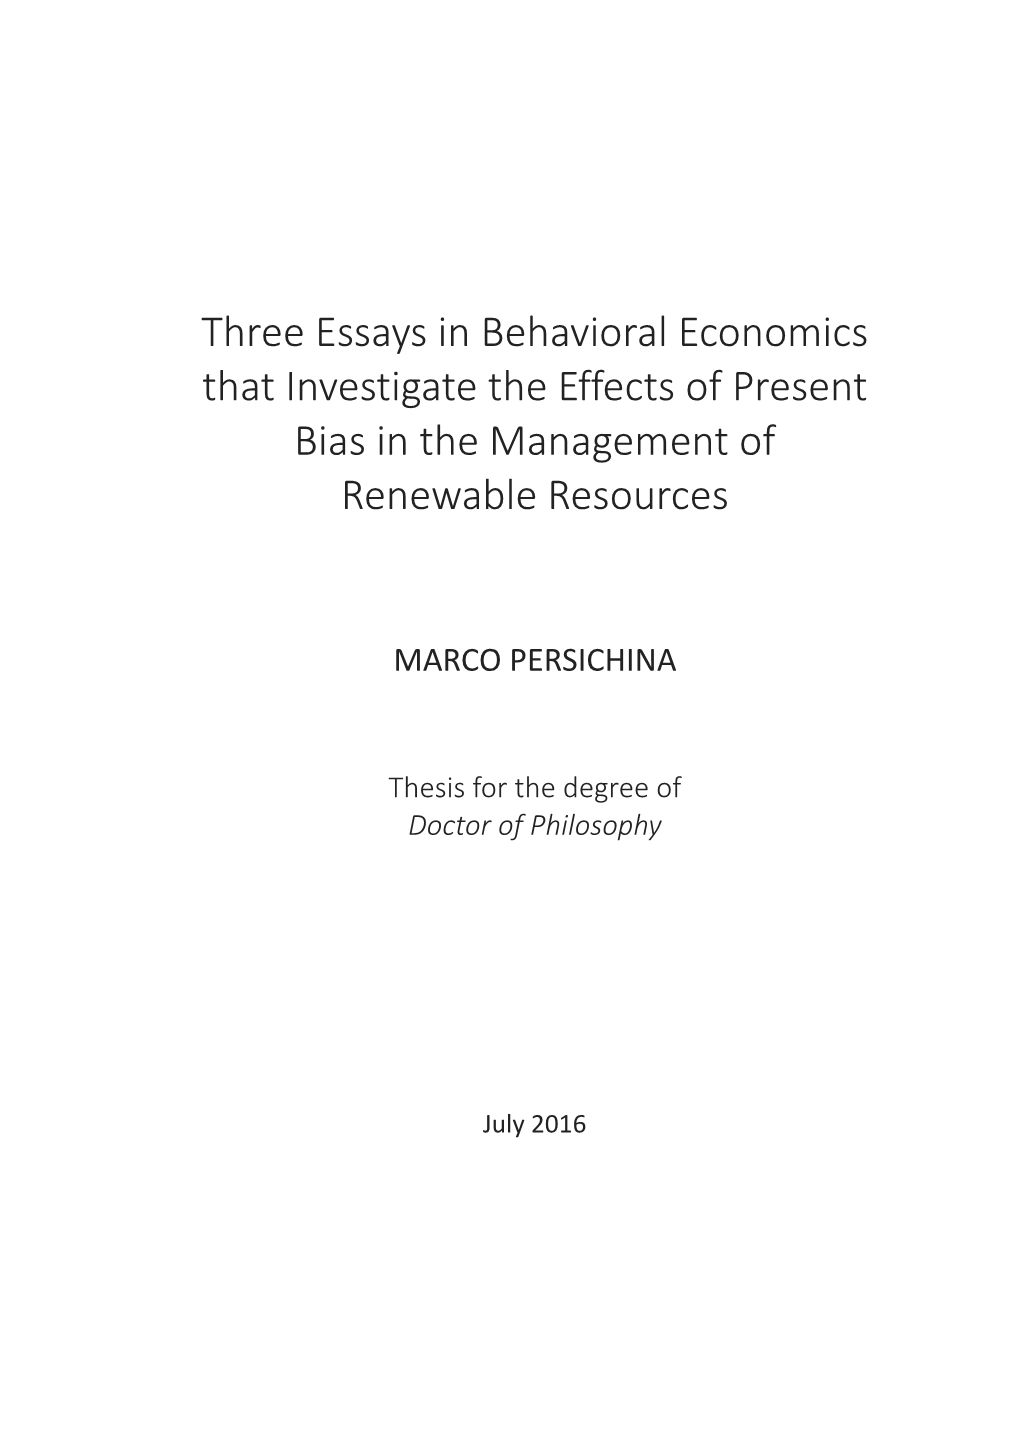 Three Essays in Behavioral Economics That Investigate the Effects of Present Bias in the Management of Renewable Resources